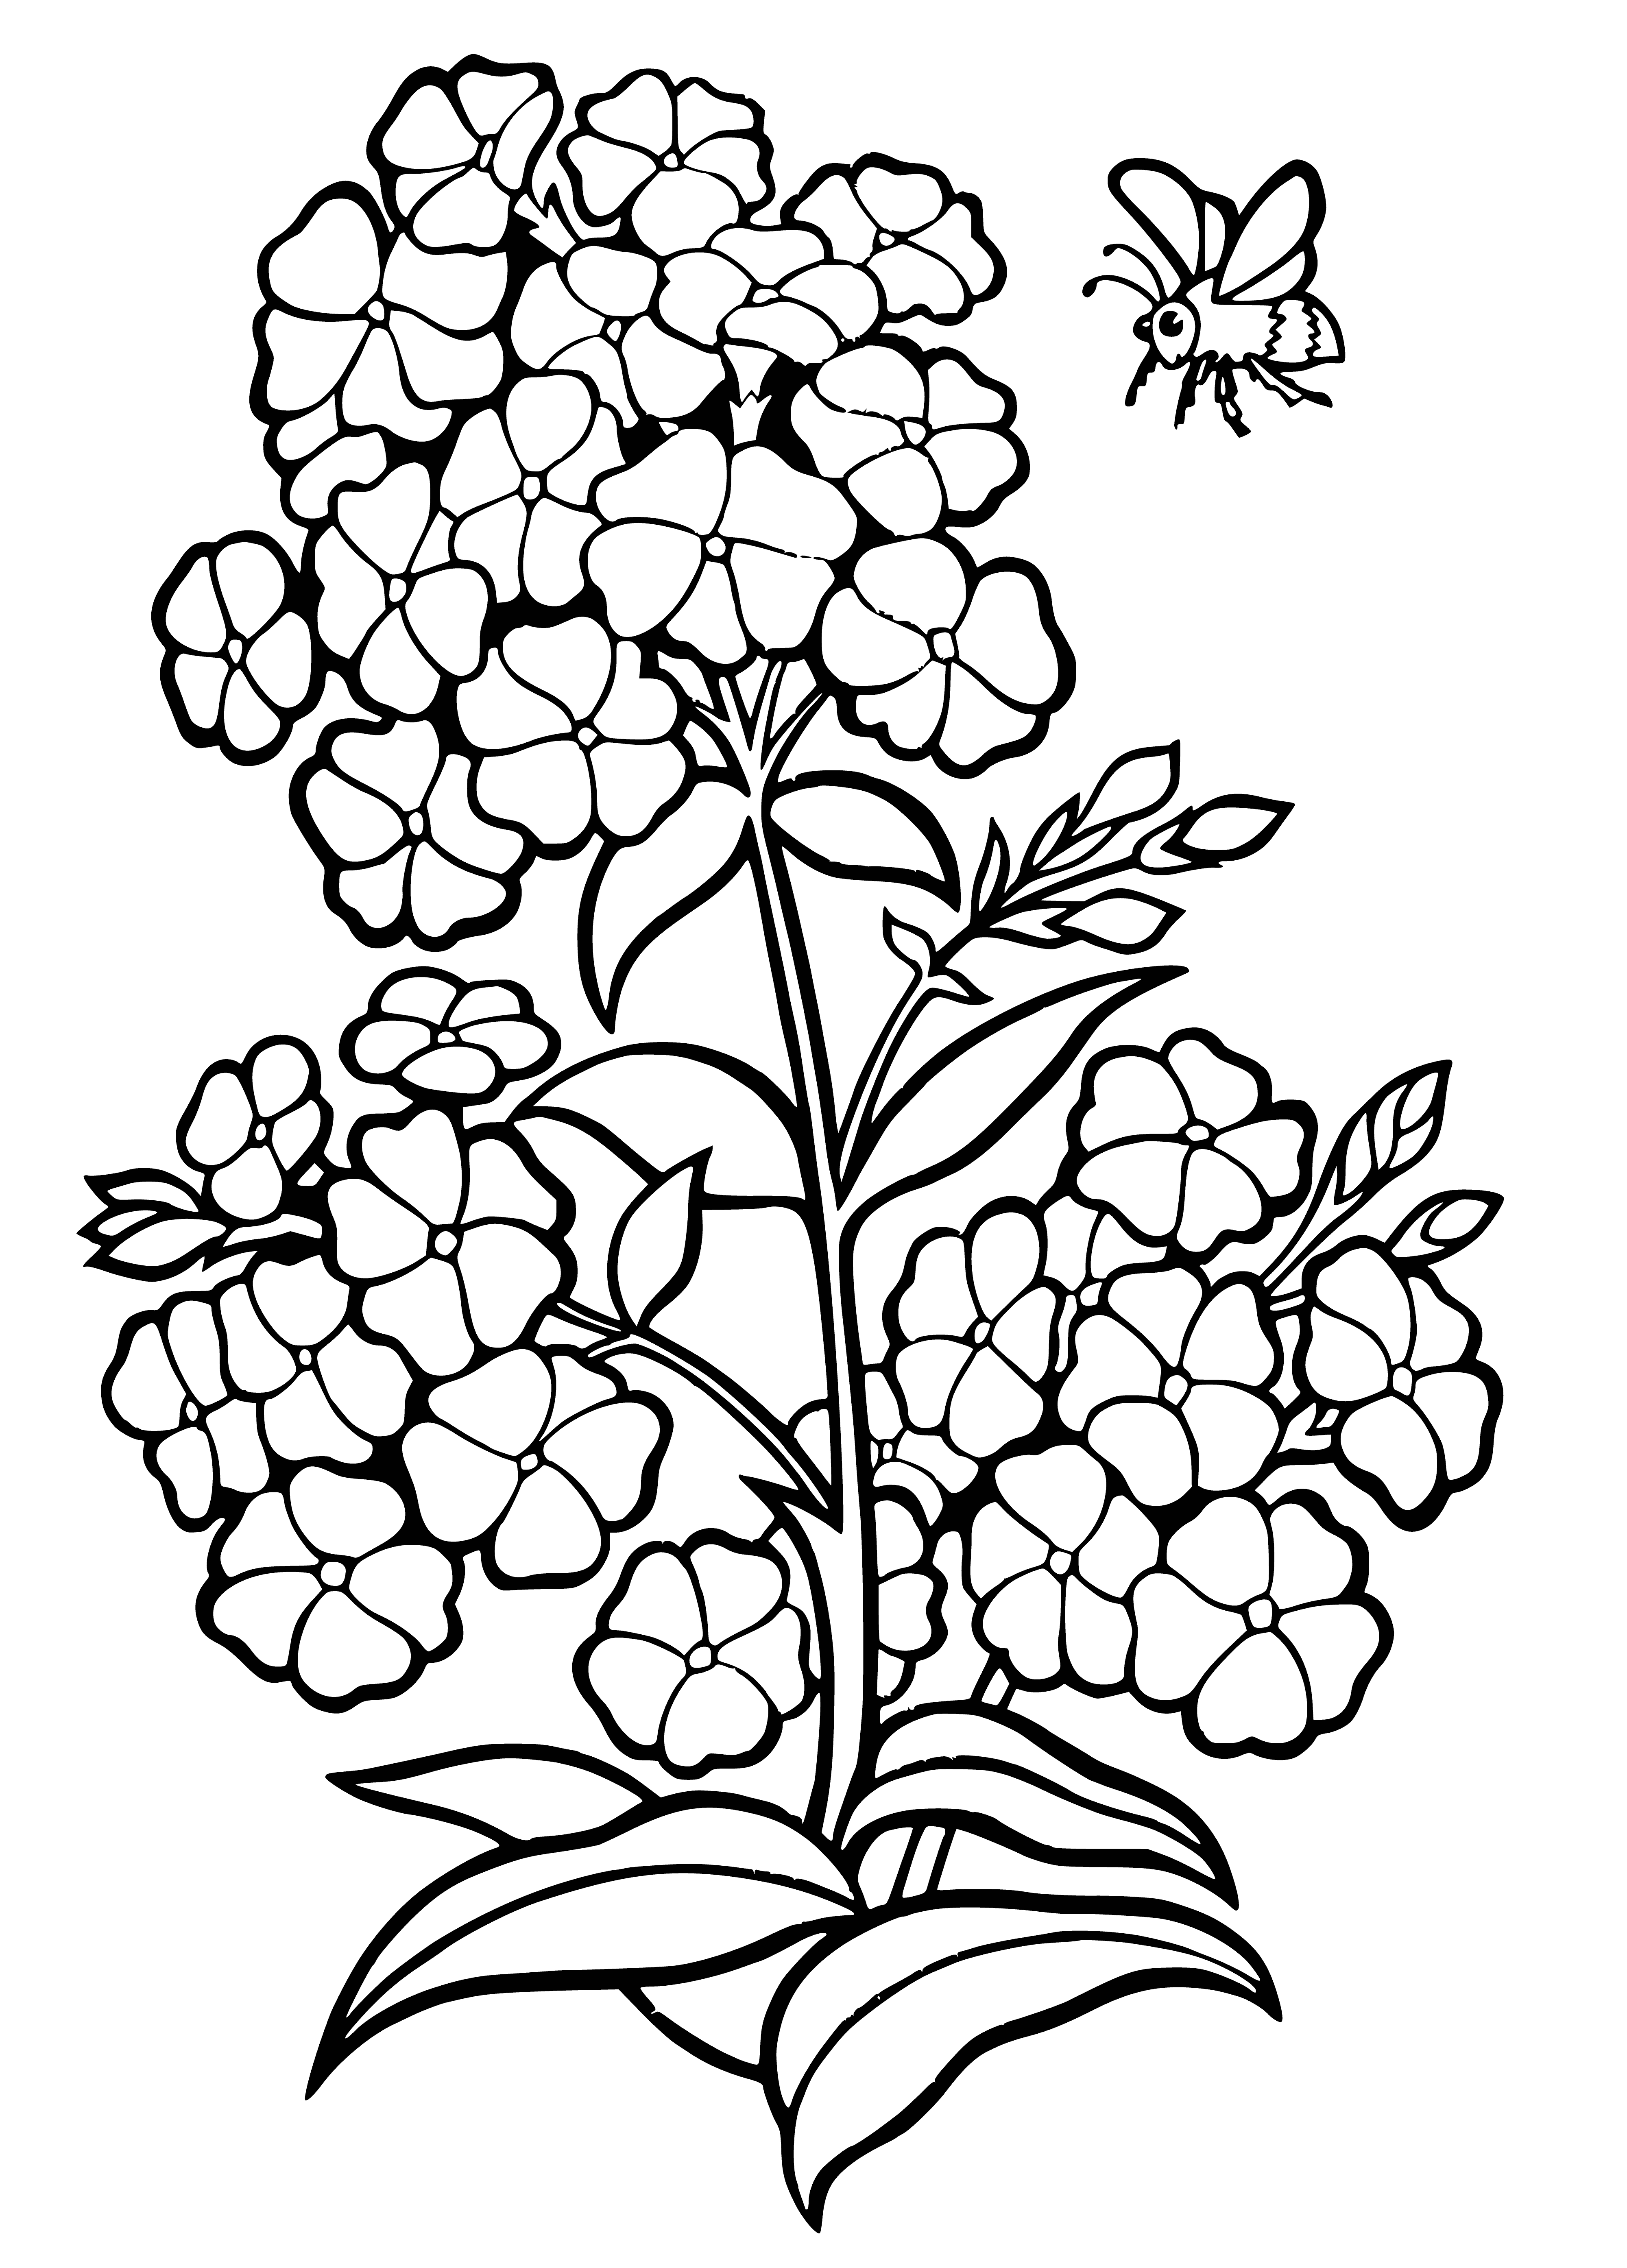 coloring page: Field of deep purple Phlox flowers with white centers, growing in a meadow surrounded by green grass and trees.